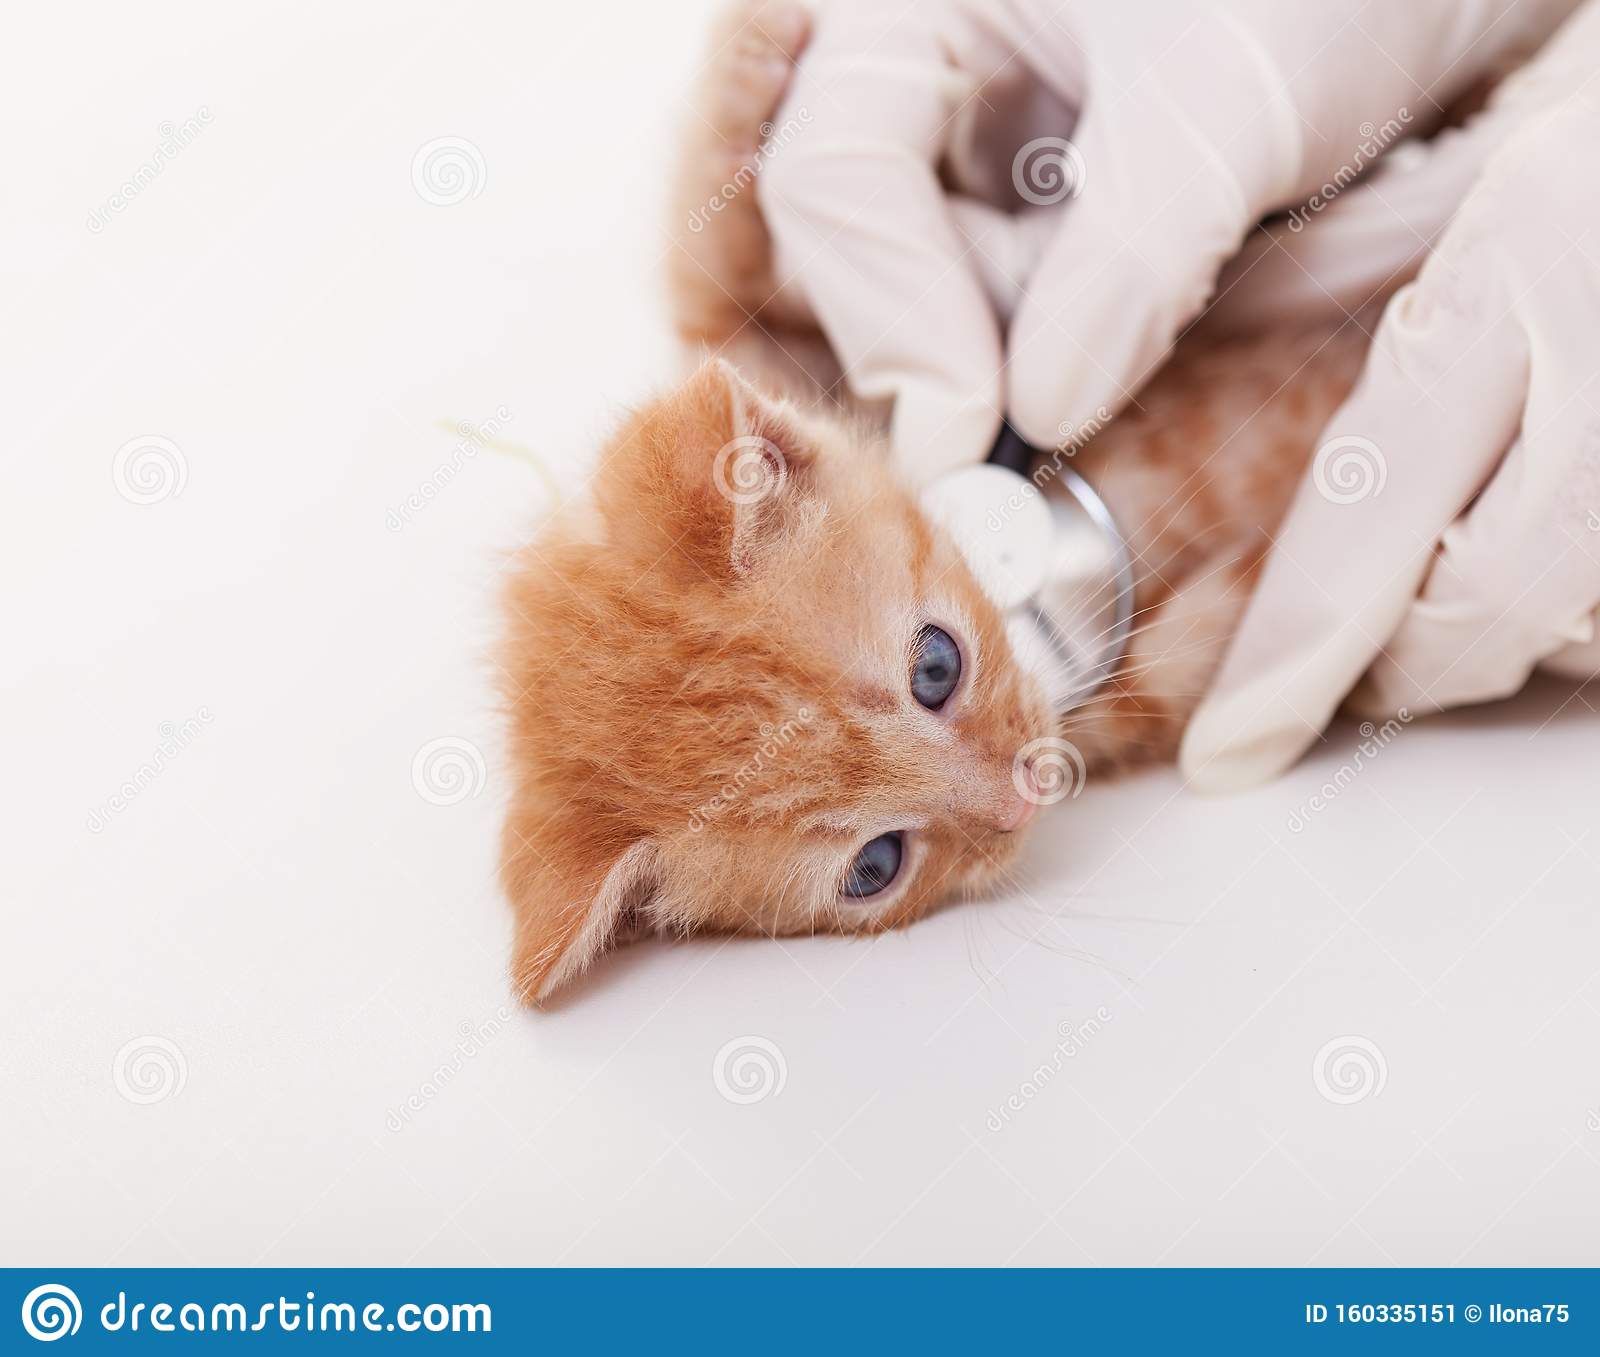 Cute Ginger Kitten Being Examined at the Veterinary Doctor Stock Image ...